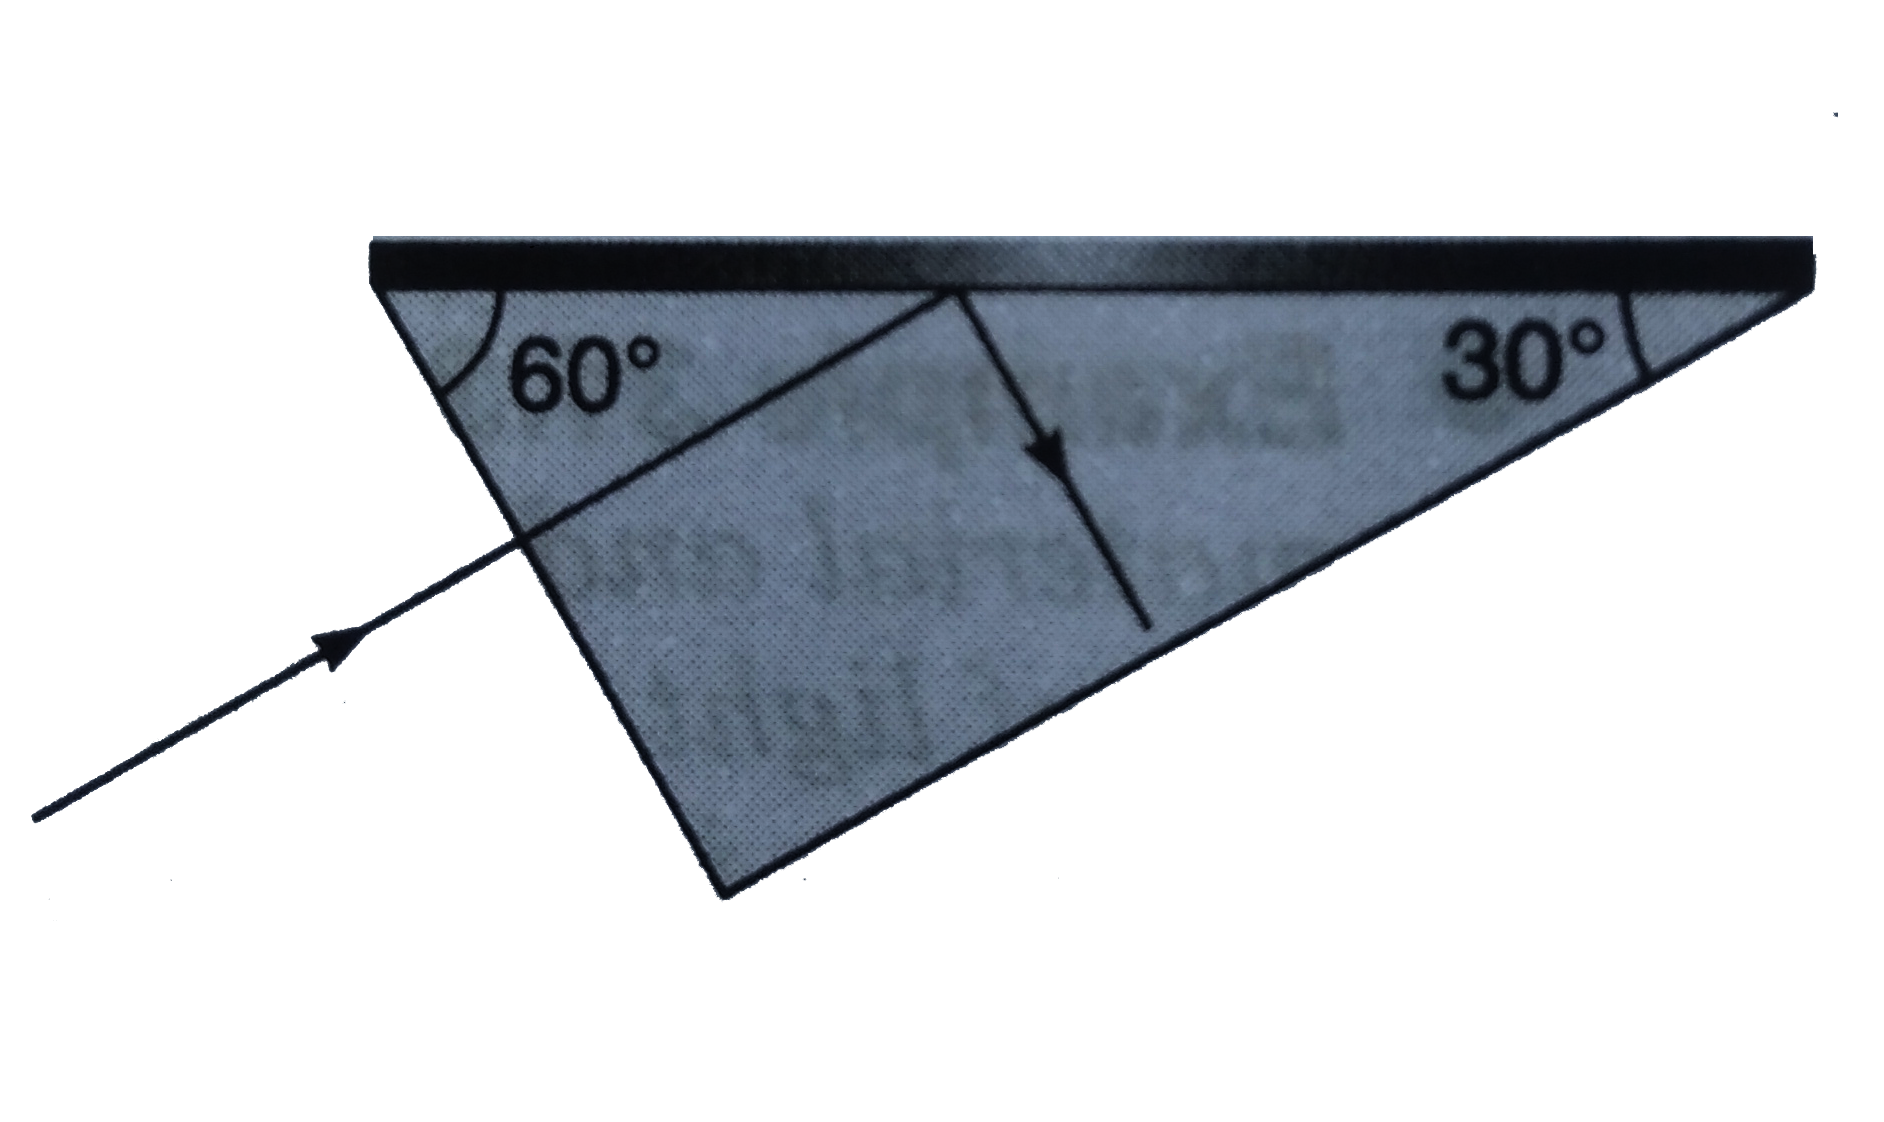 Light is incident normally on the short face of a 30^@-60^@-90^@ prism. A liquid is poured on the hypotenuse of the prism. If the refractive index of the prism is sqrt(3), find the maximum refractive index of the liquid so that light is totally reflected.